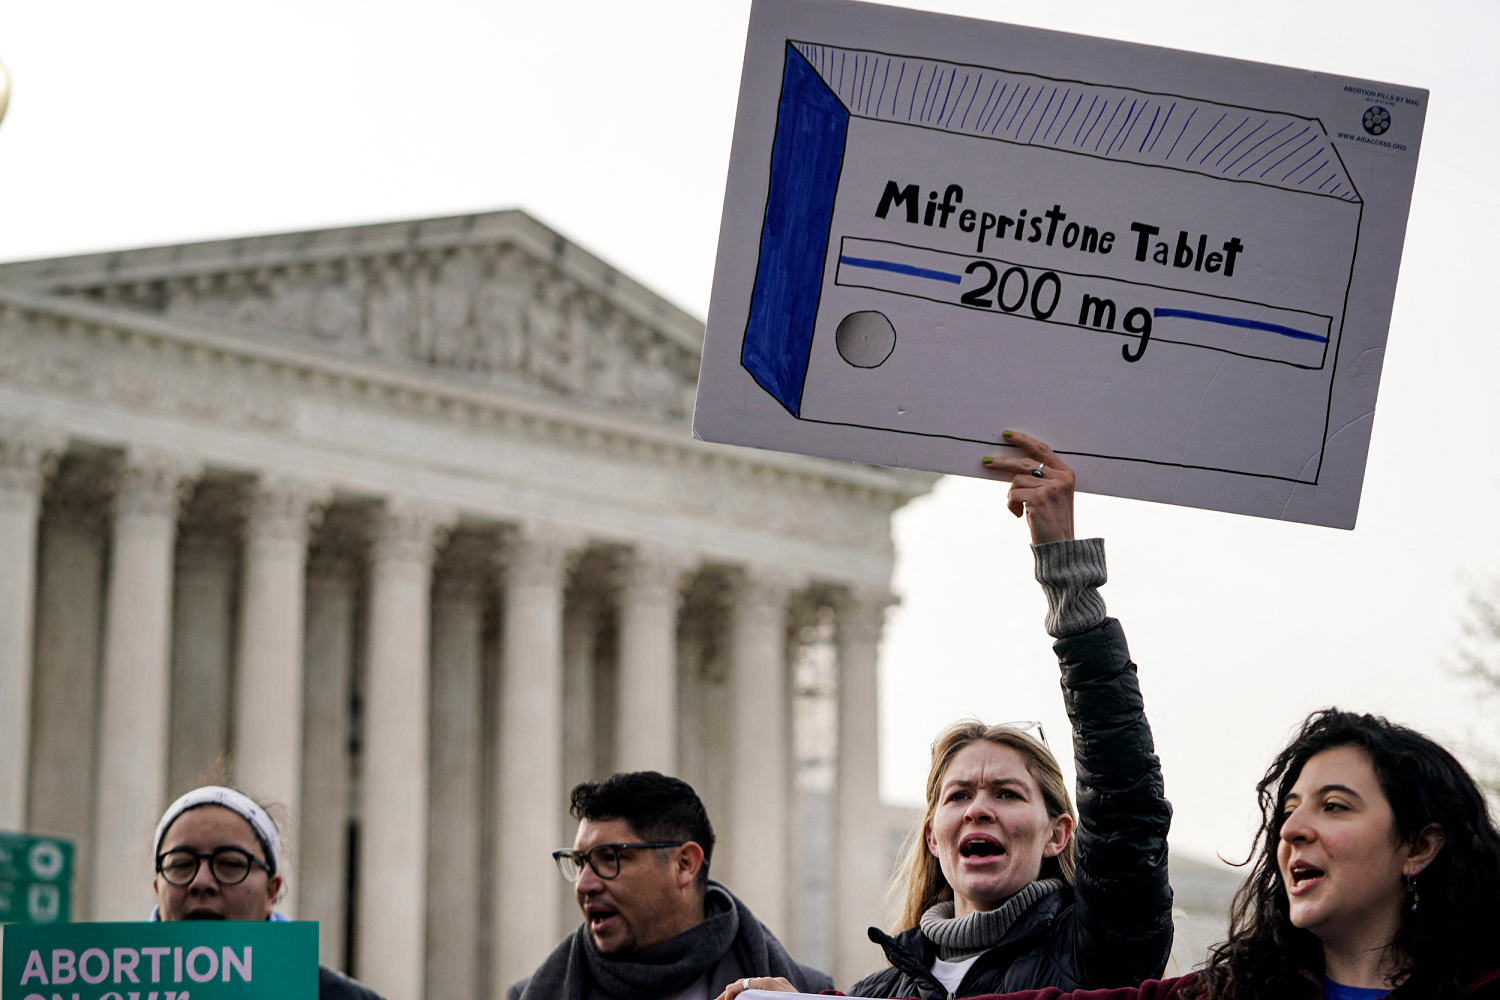 Supreme Court justices question 'conscience objections' in abortion pill case